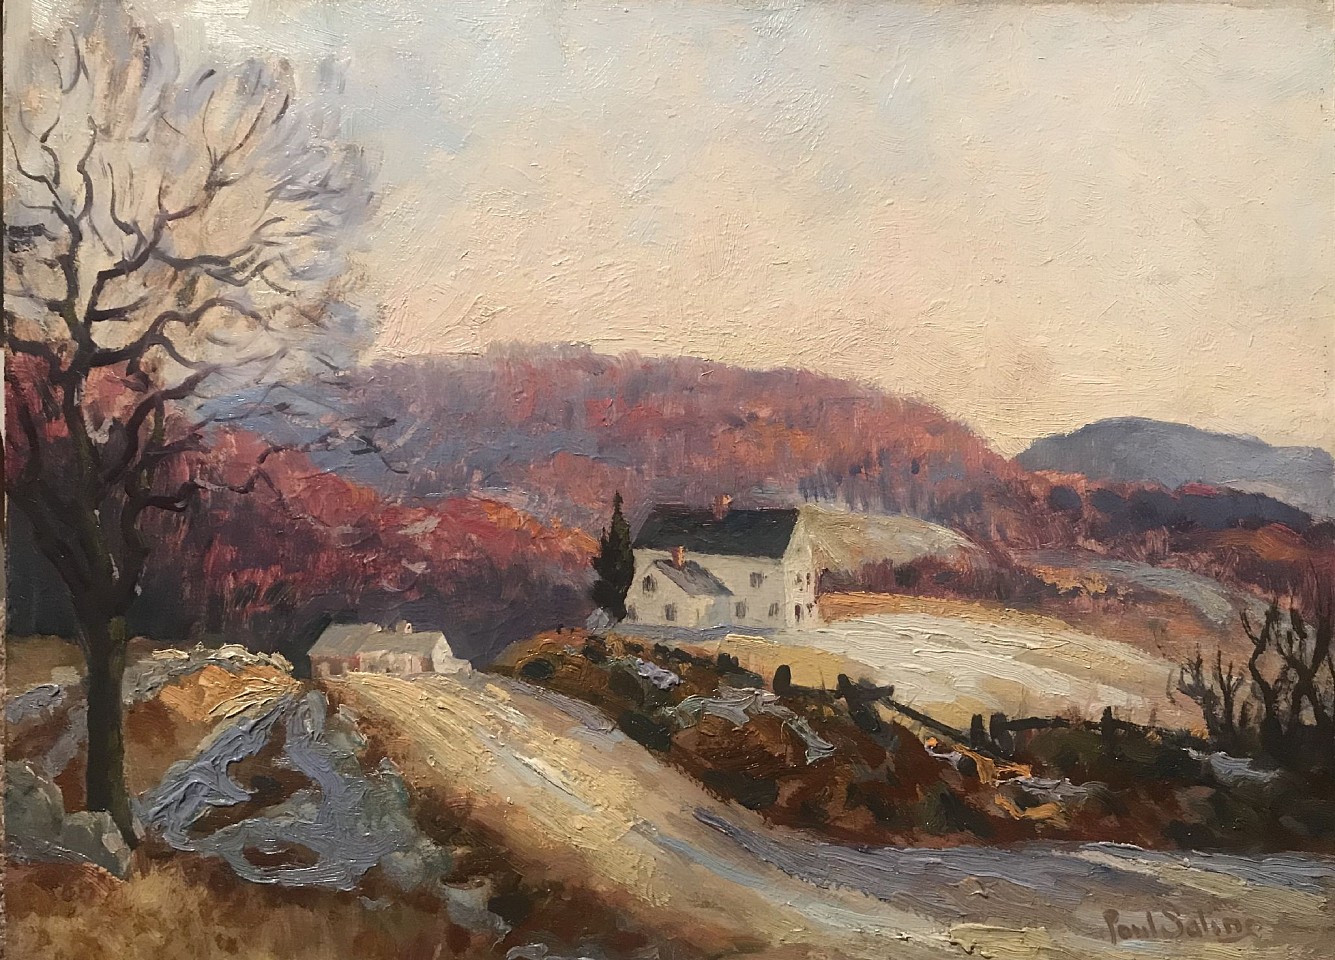 Paul E. Saling, First Snow
oil on board, 12" x 16"
signed, Paul Saling, lower right
titled and signed again verso
JCA 5089
$1,800